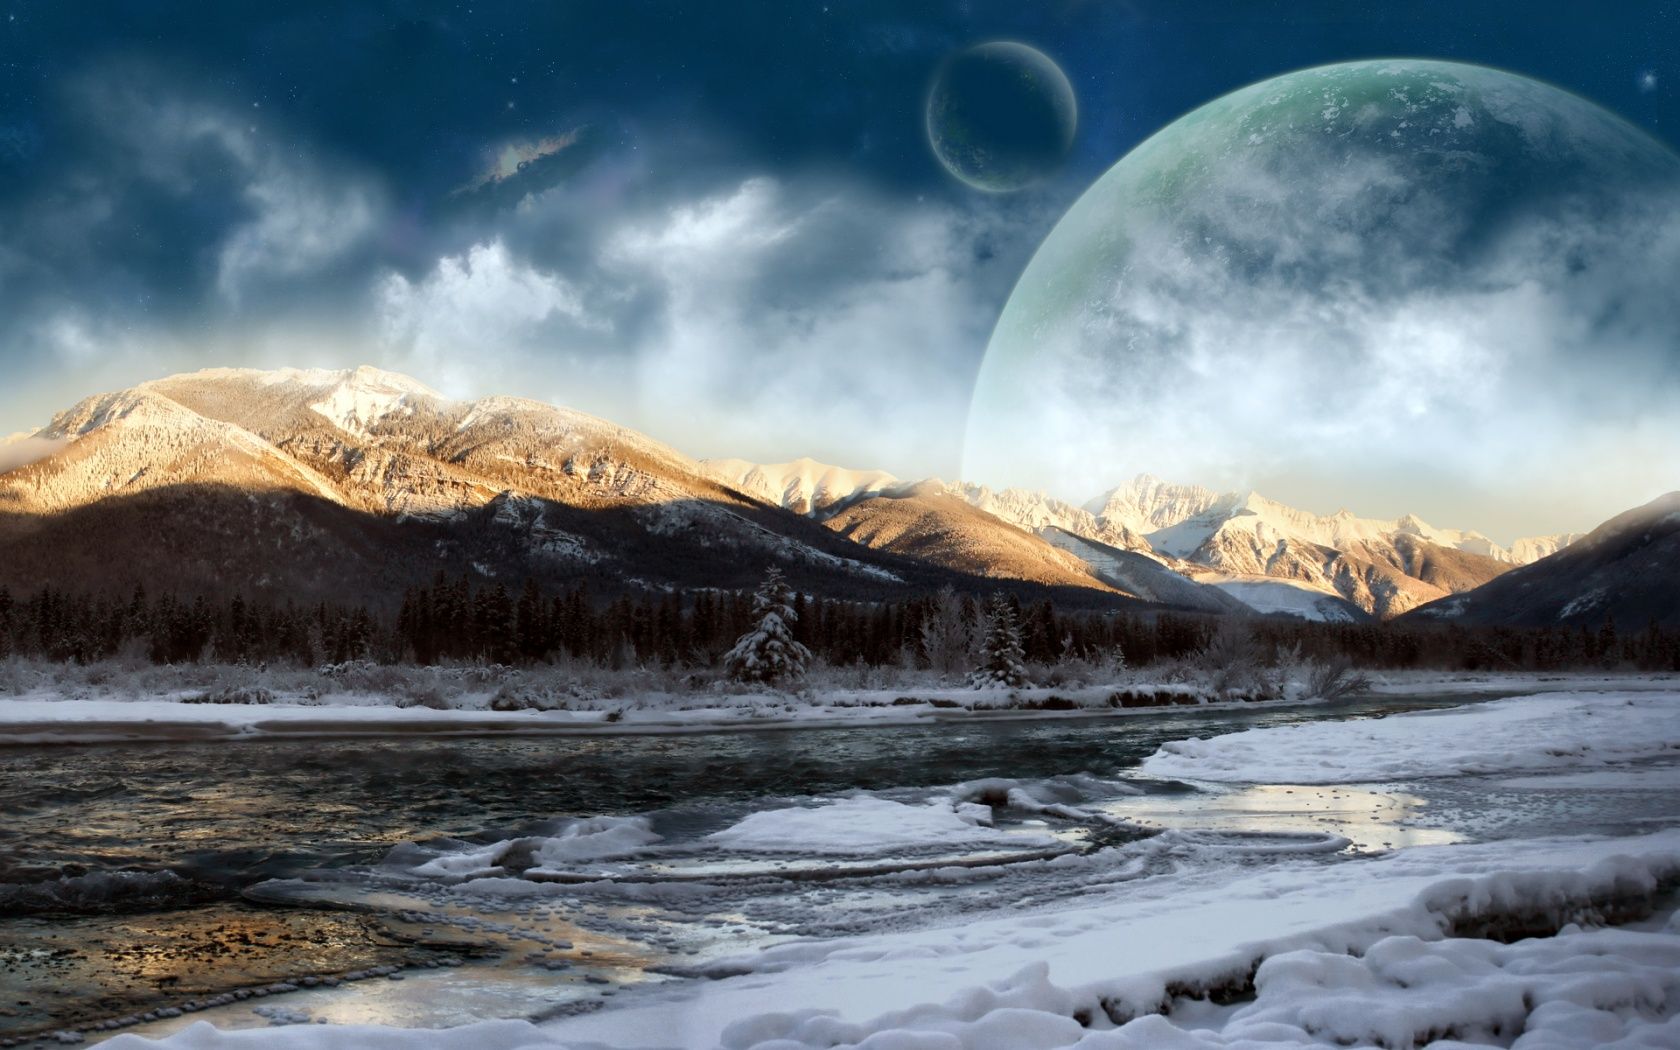 Ice mountains outer space planets science fiction wallpaper